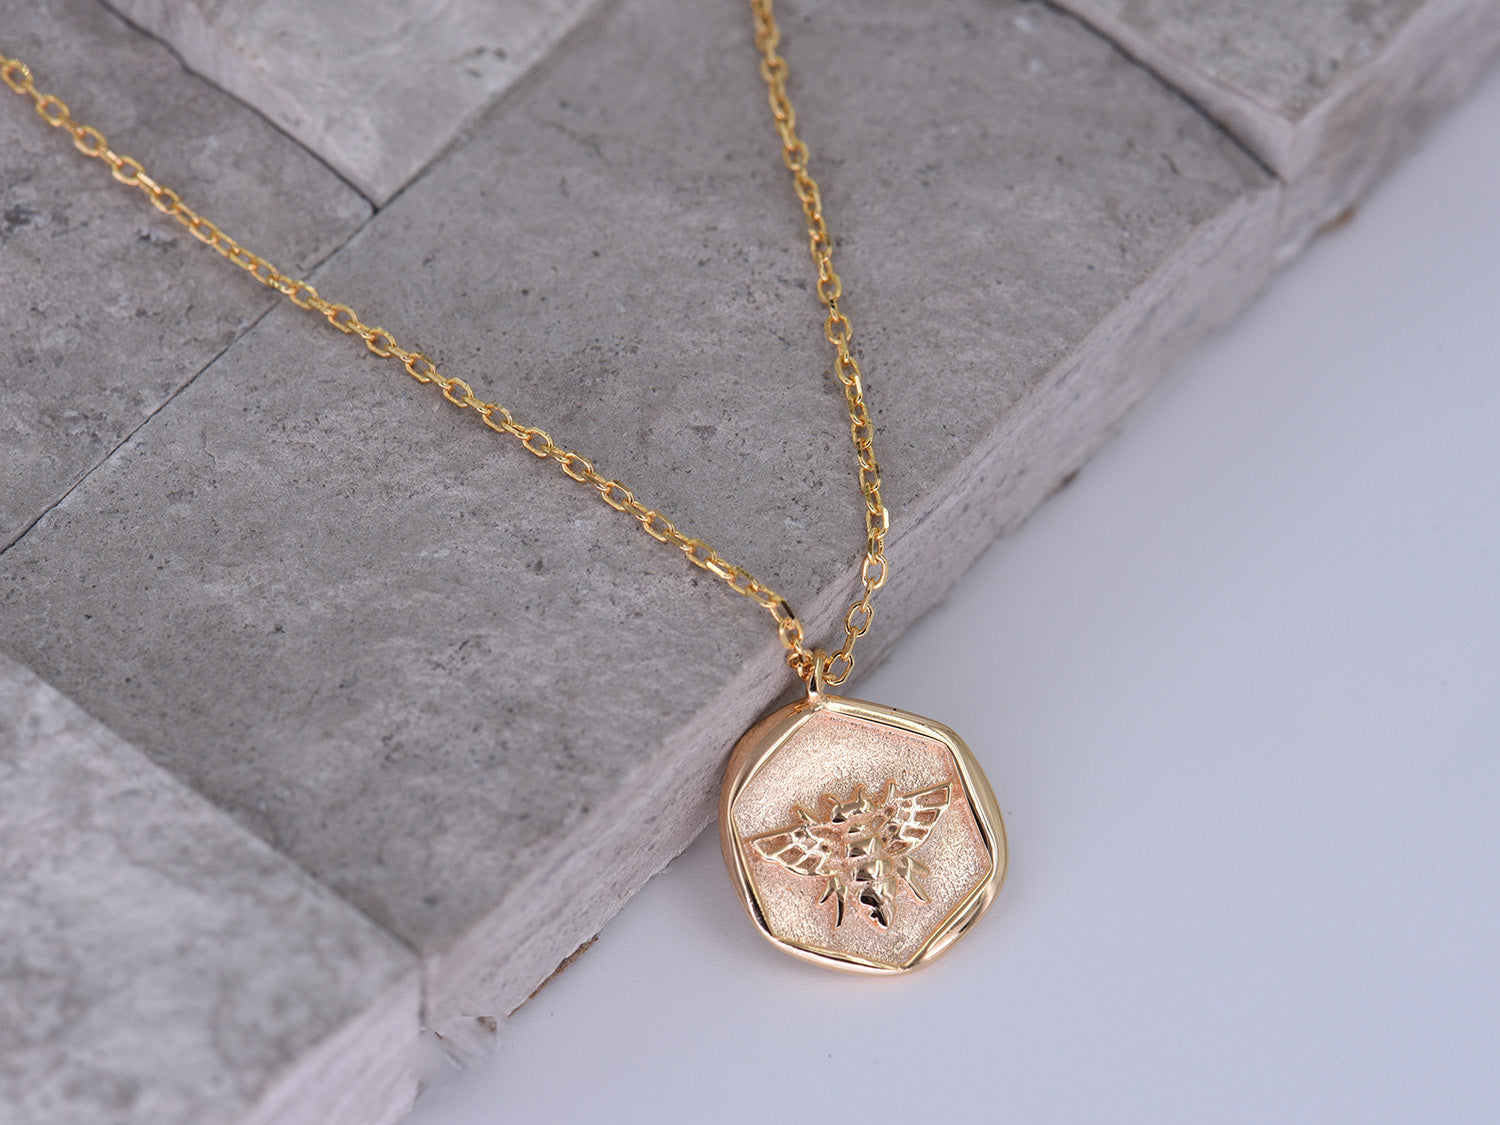 Gold Coin Necklace [18K Plated On .925 Sterling Silver] "Sweet Honey Bee" Charm Pendant